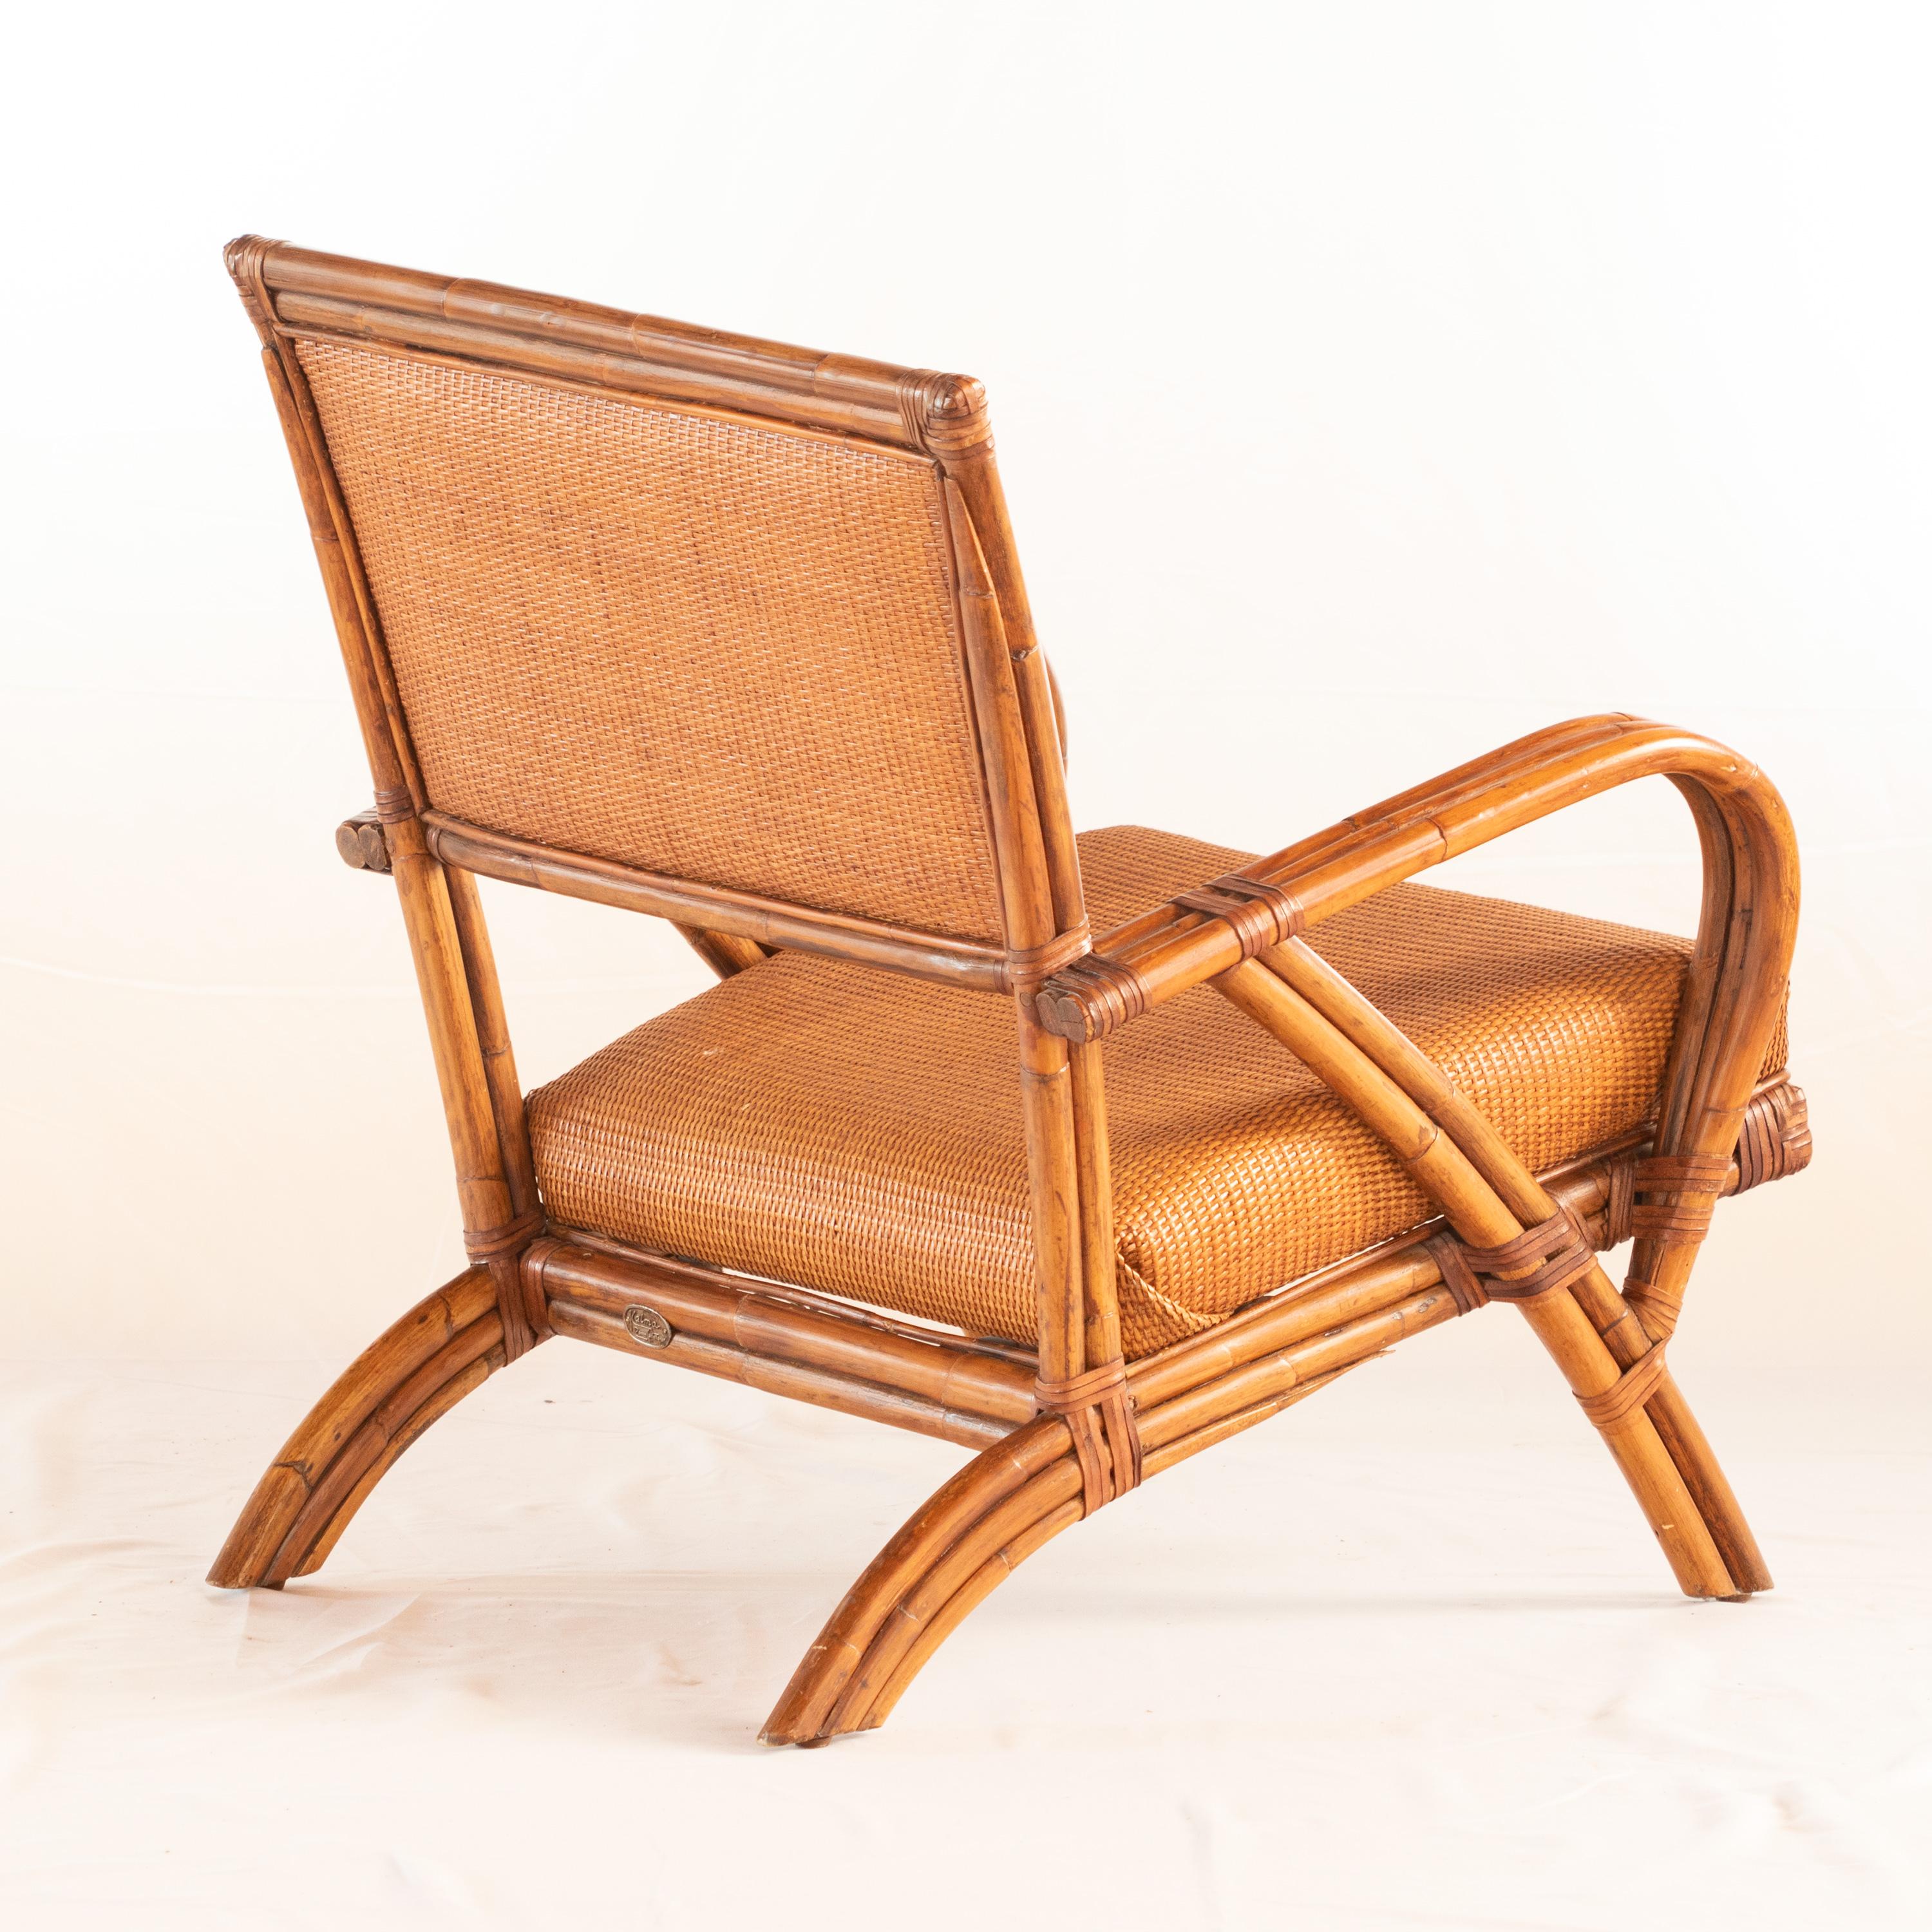 Chinese Export Rattan Split Chair Wood Confortable Modern Asian Modern Kalma Furniture For Sale